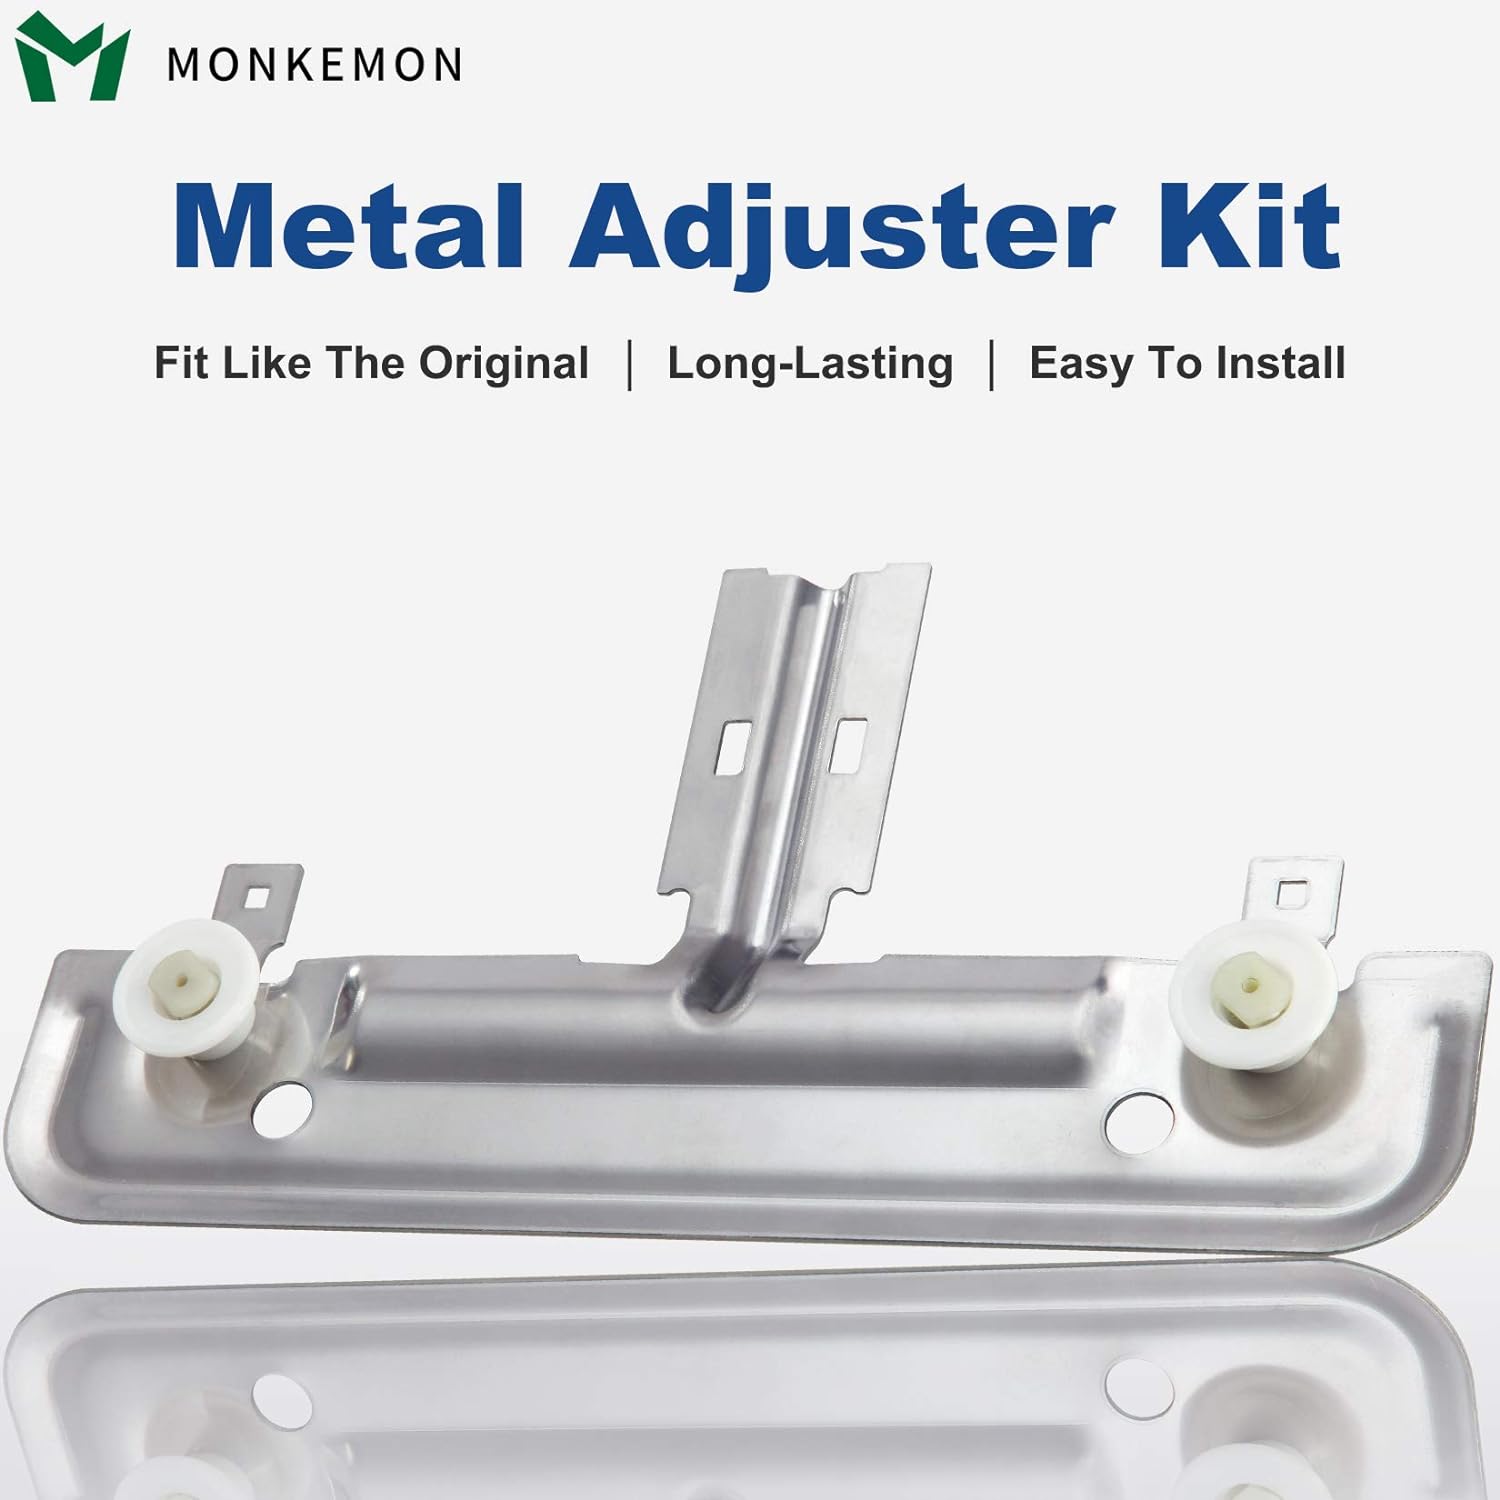 Monkemon W10712395 Dishwasher Upper Rack Adjuster Metal Kit, Replace W10350375 AP5957560 Dishwasher Parts, Compatible with kenmore whirl